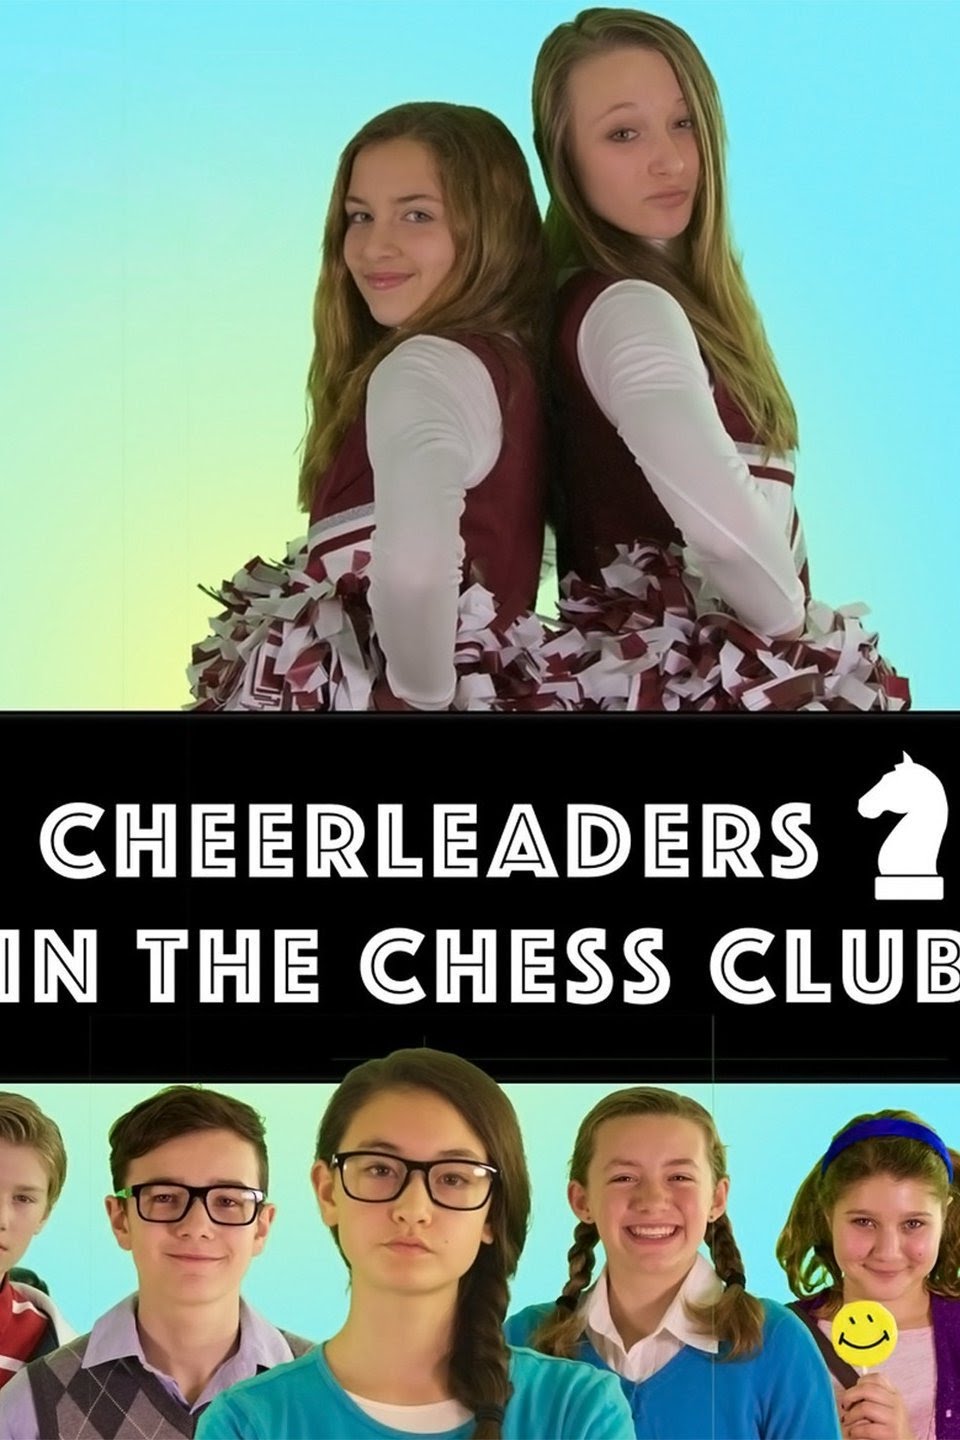 Cheerleaders in the Chess Club